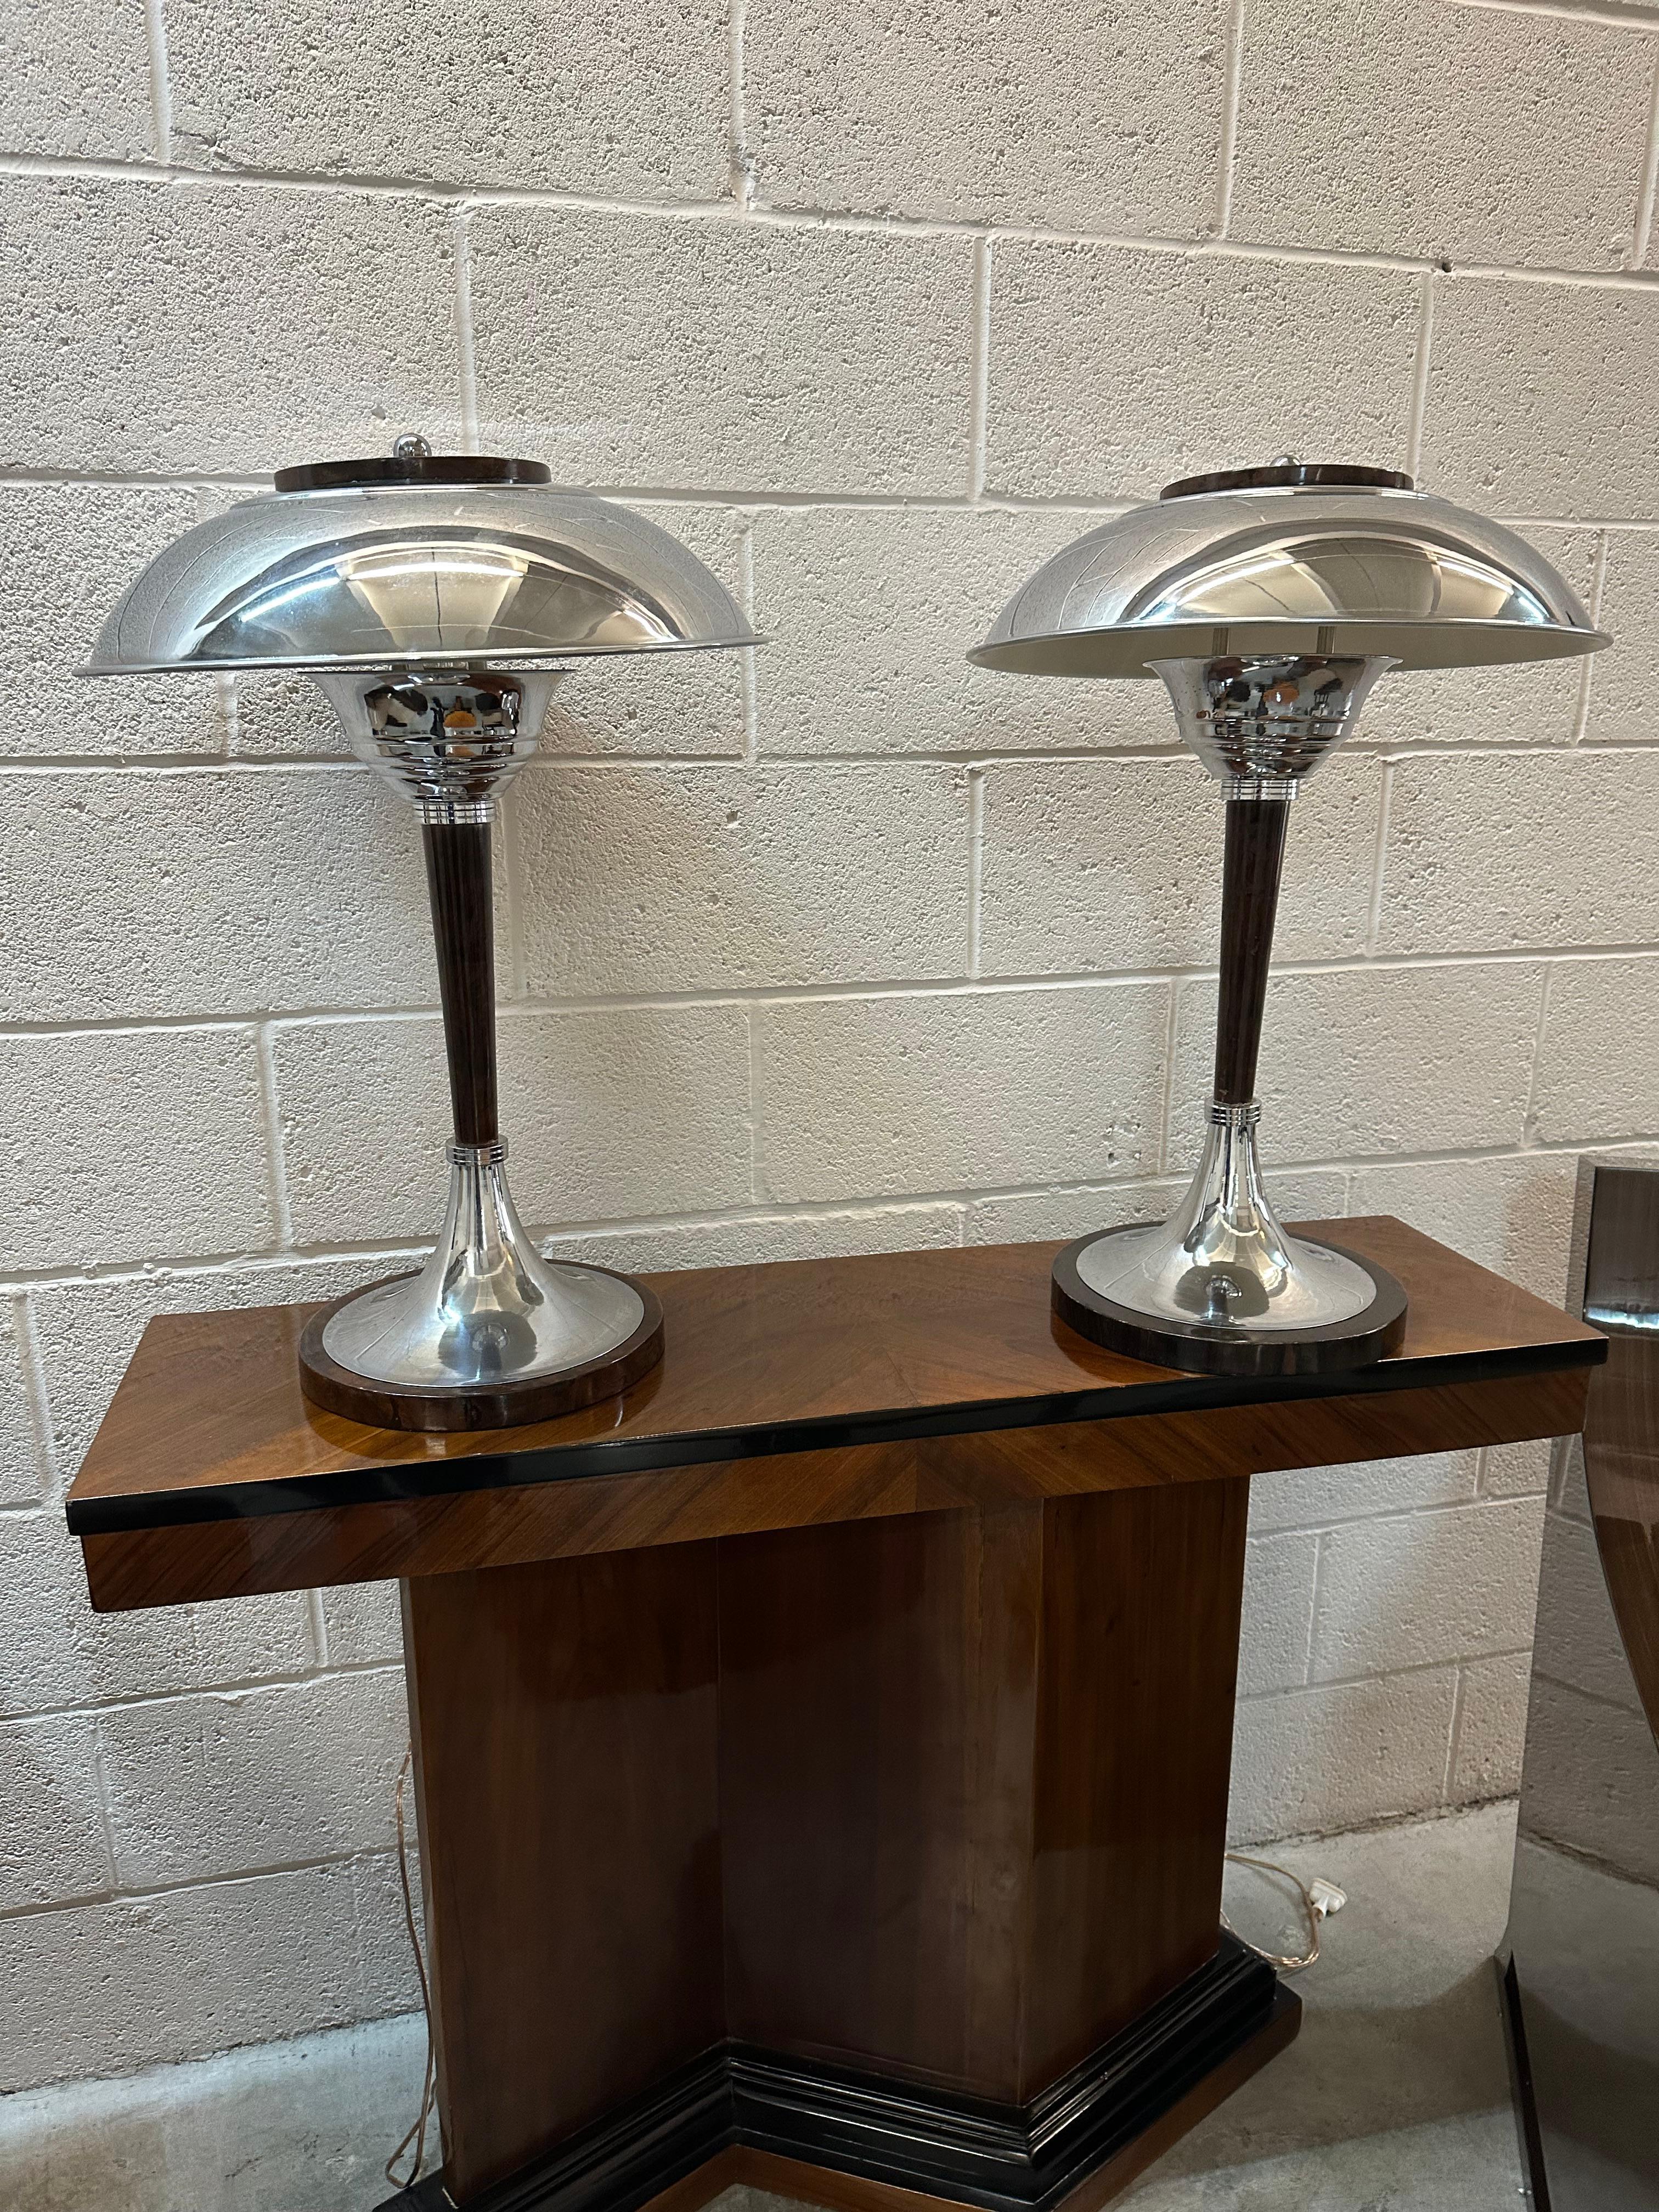 Pair of Art Deco Table Lamp in wood and chrome, 1920, France For Sale 7